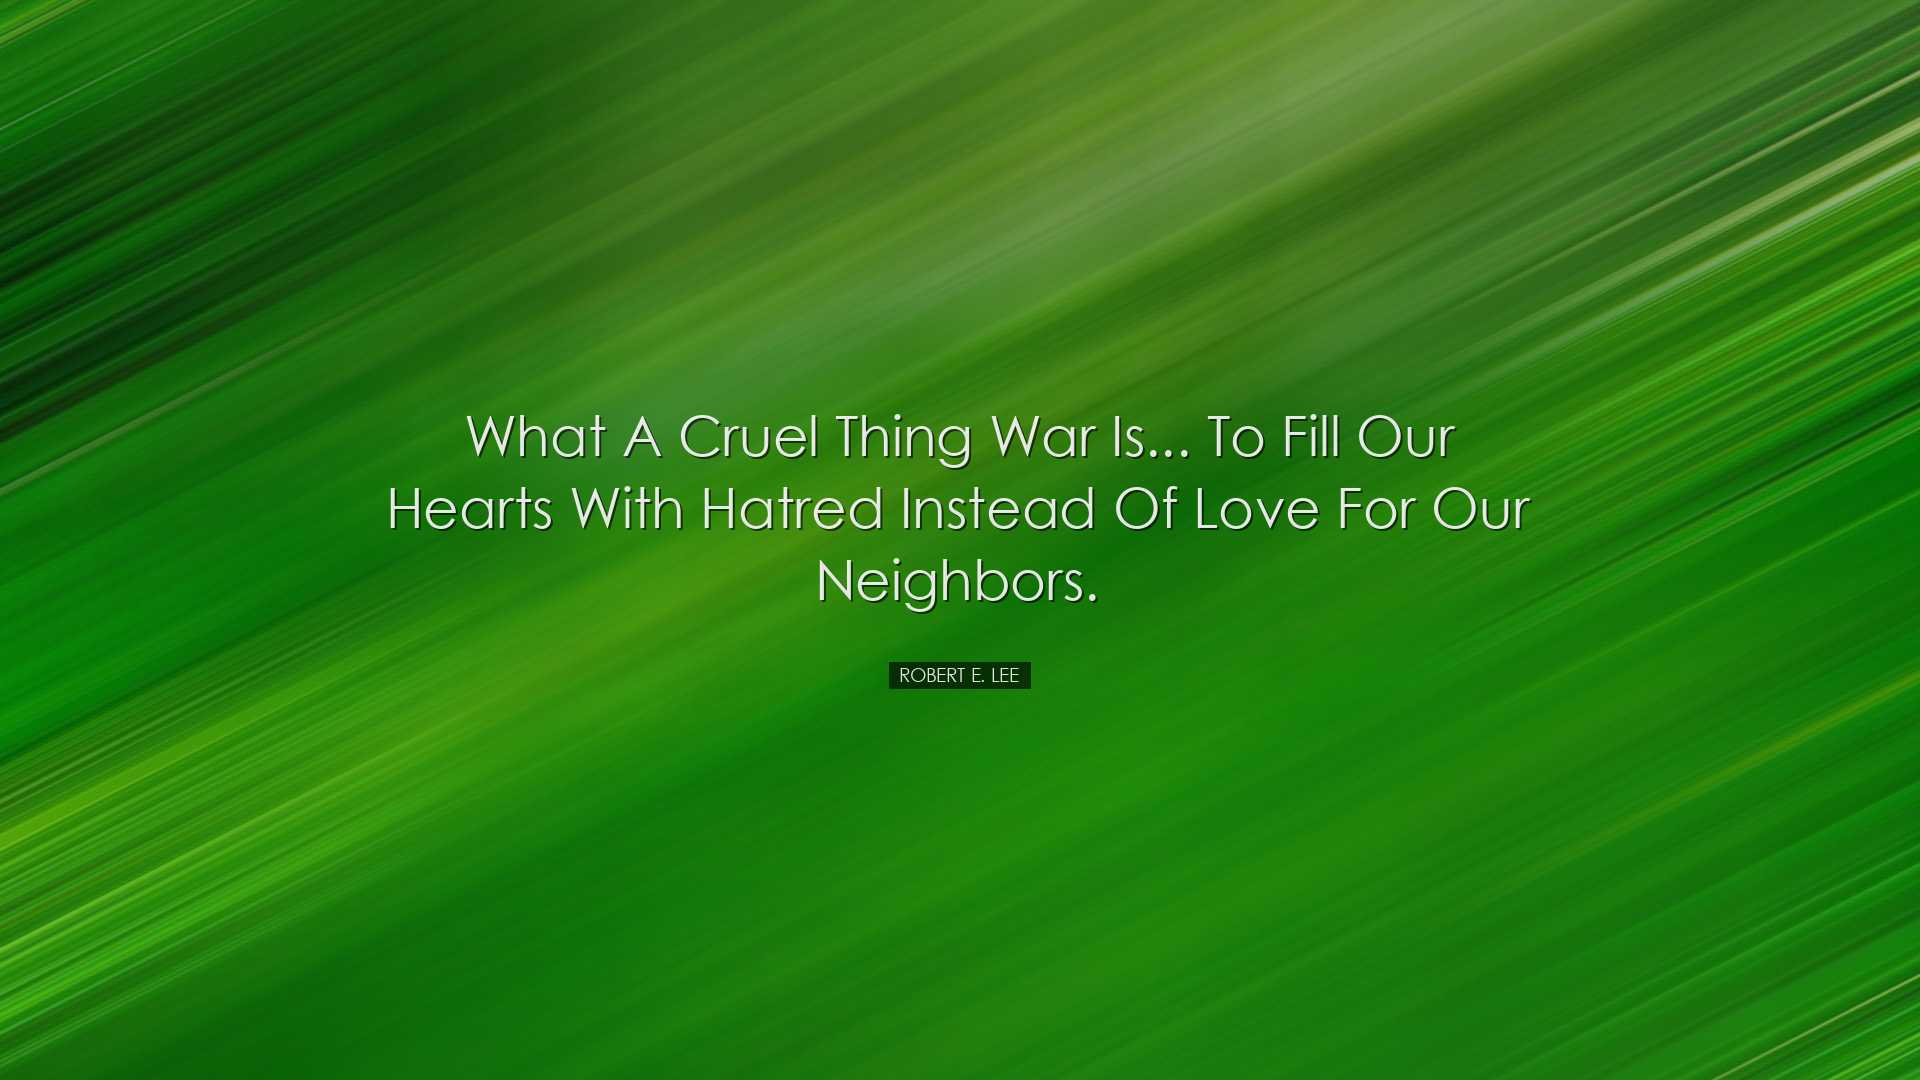 What a cruel thing war is... to fill our hearts with hatred instea